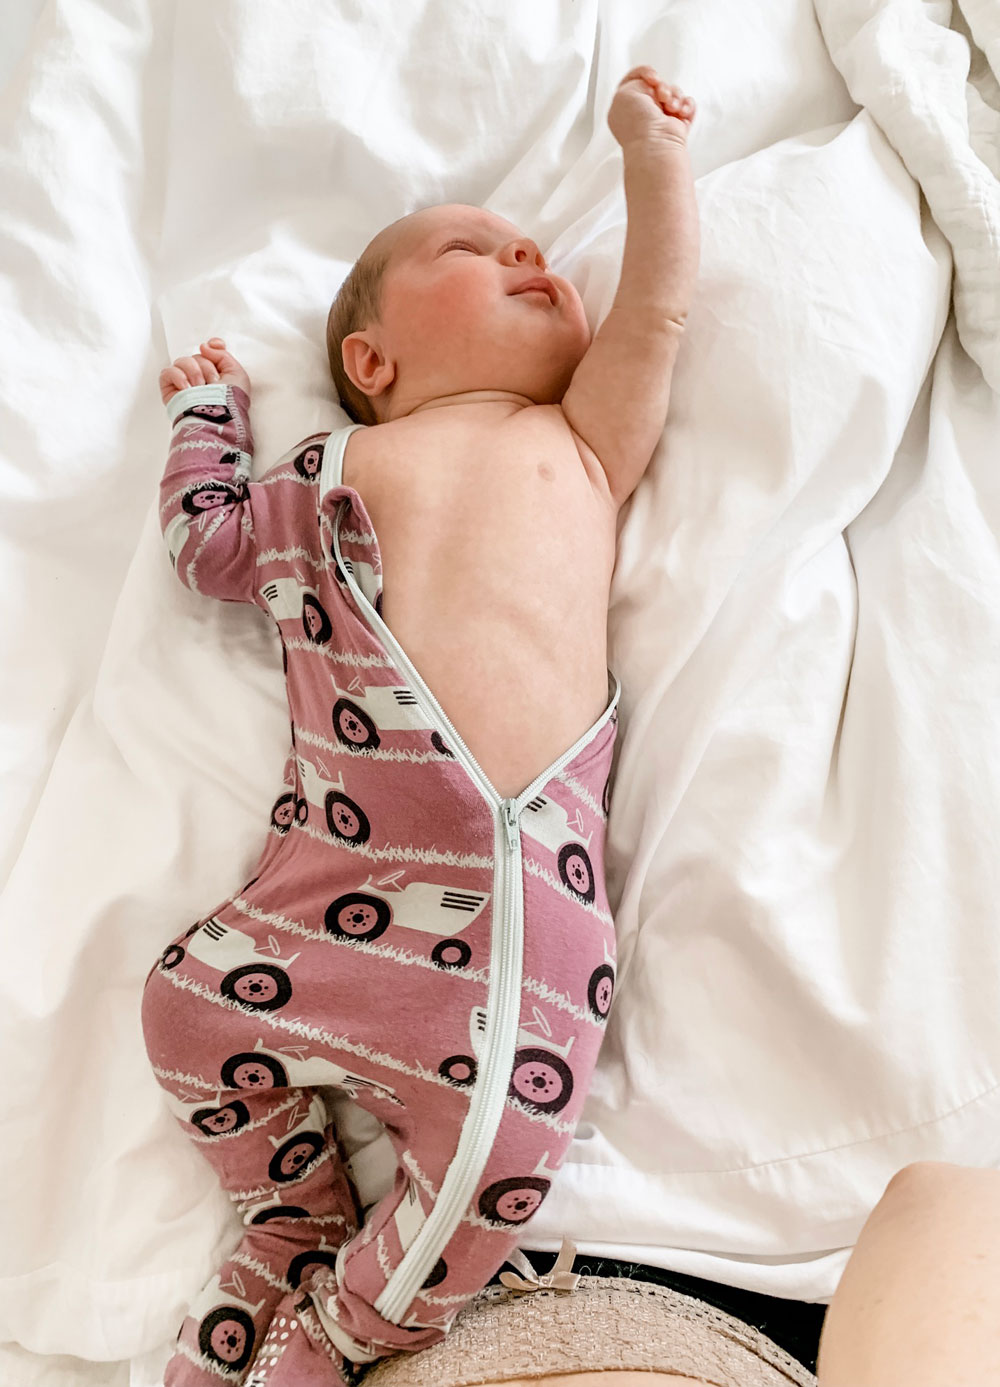 The 10 newborn baby essentials every first time new mom should put on their baby registry